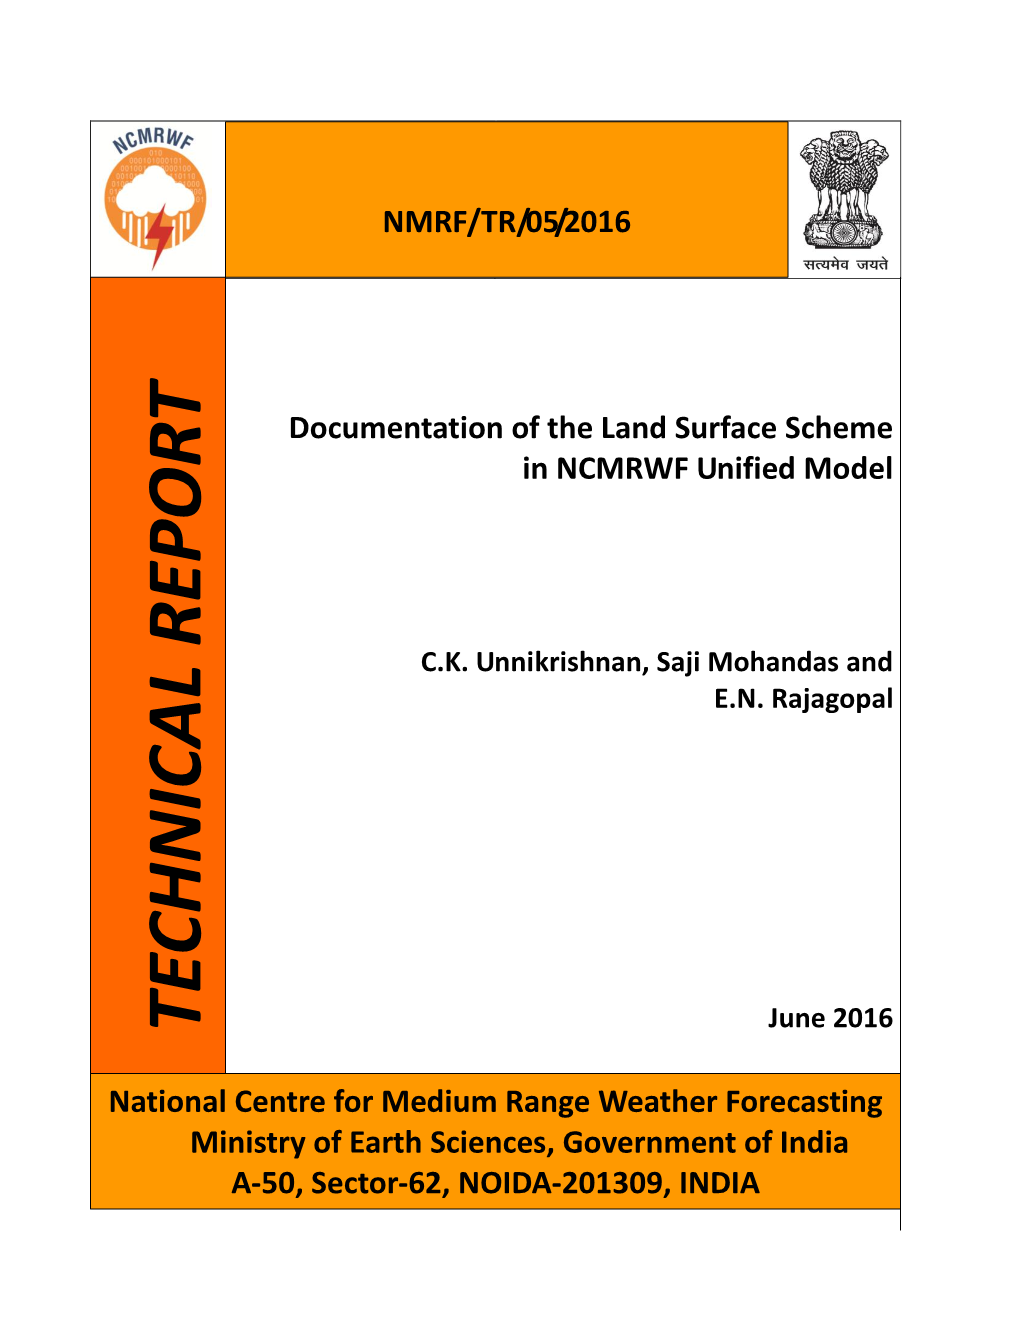 Documentation of the Land Surface Scheme in NCMRWF Unified Model